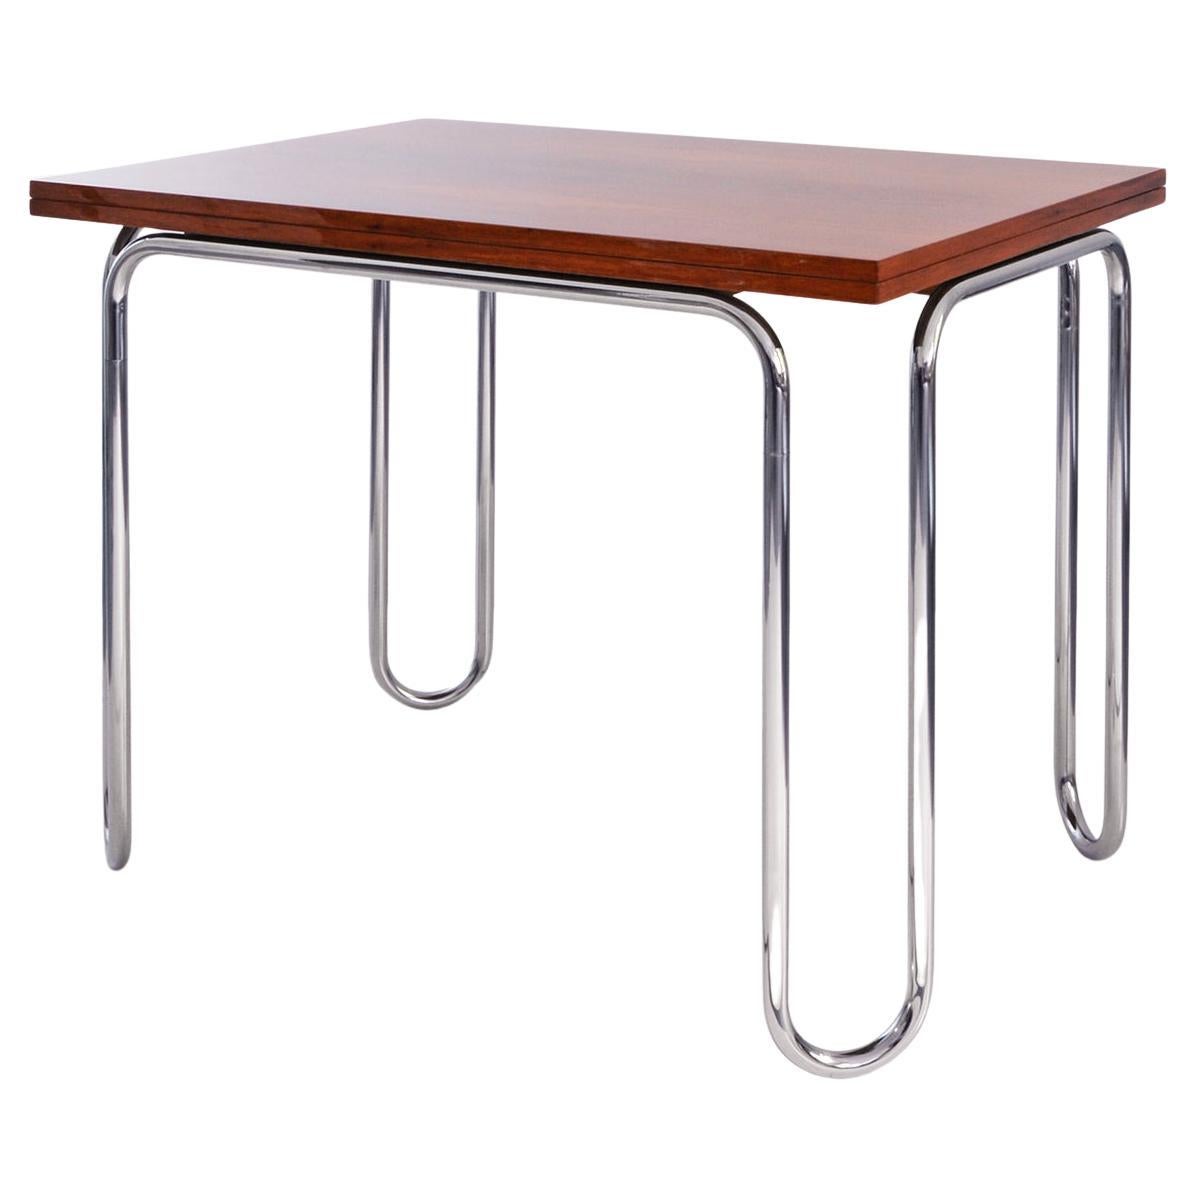 Modernist Folding Table, Chrome Plated Steel, Veneered Wood, Made-To-Measure For Sale